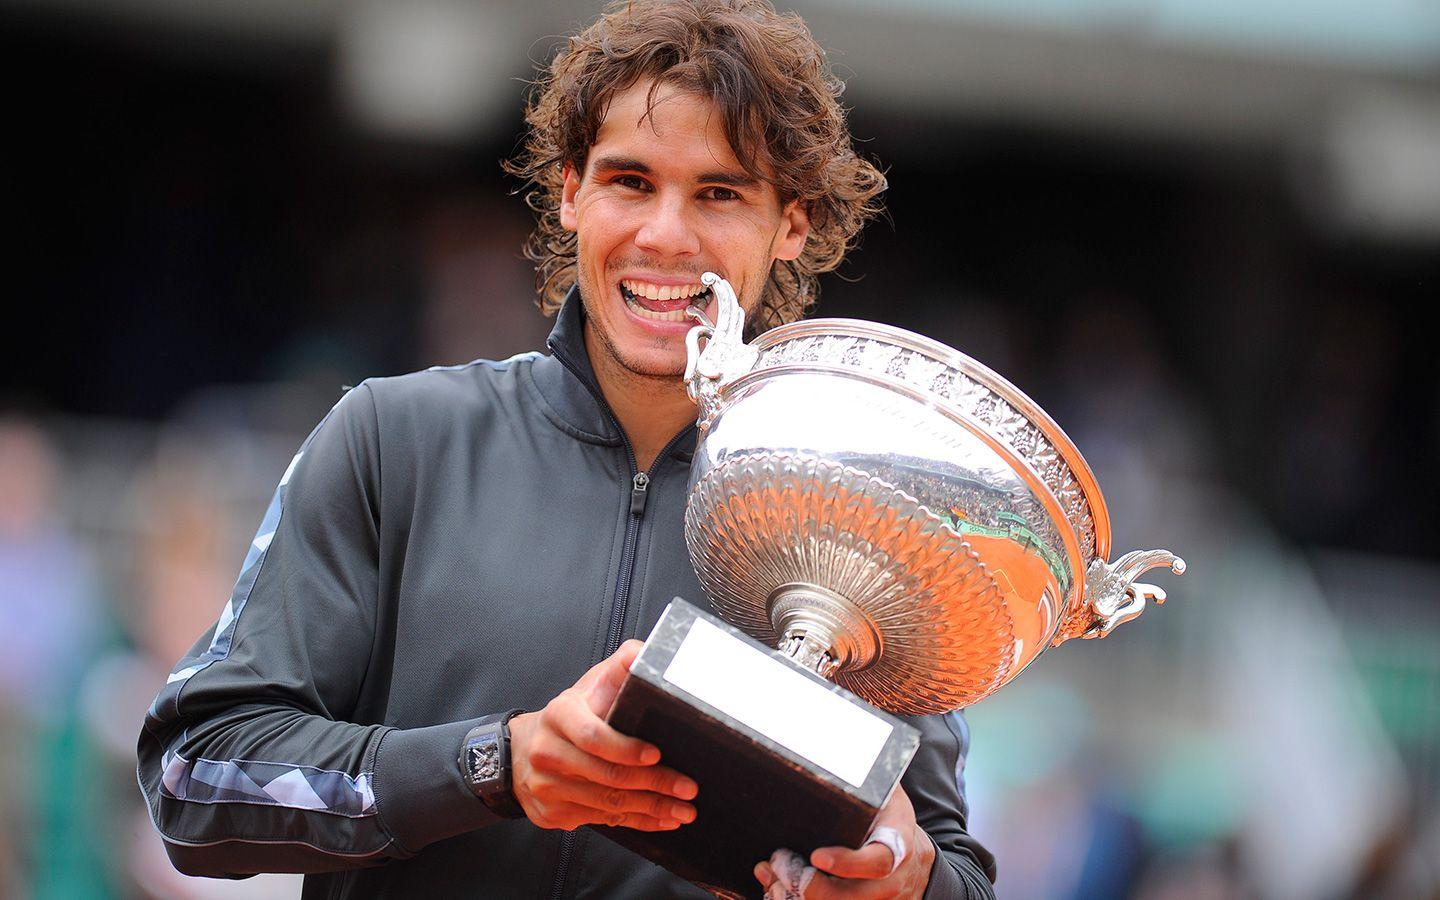 Rafael Nadal's tryst with Roland Garros